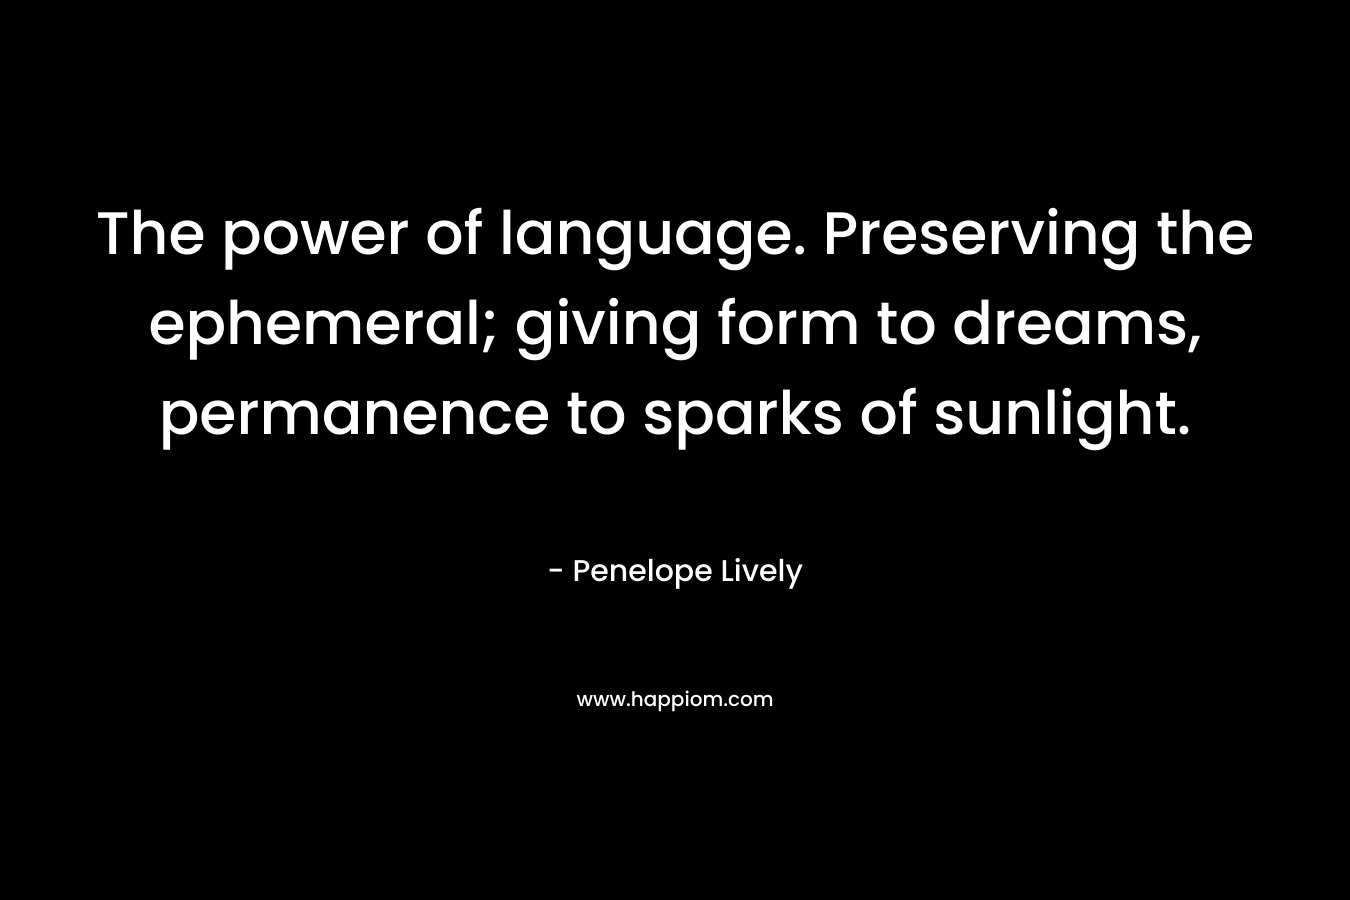 The power of language. Preserving the ephemeral; giving form to dreams, permanence to sparks of sunlight. – Penelope Lively